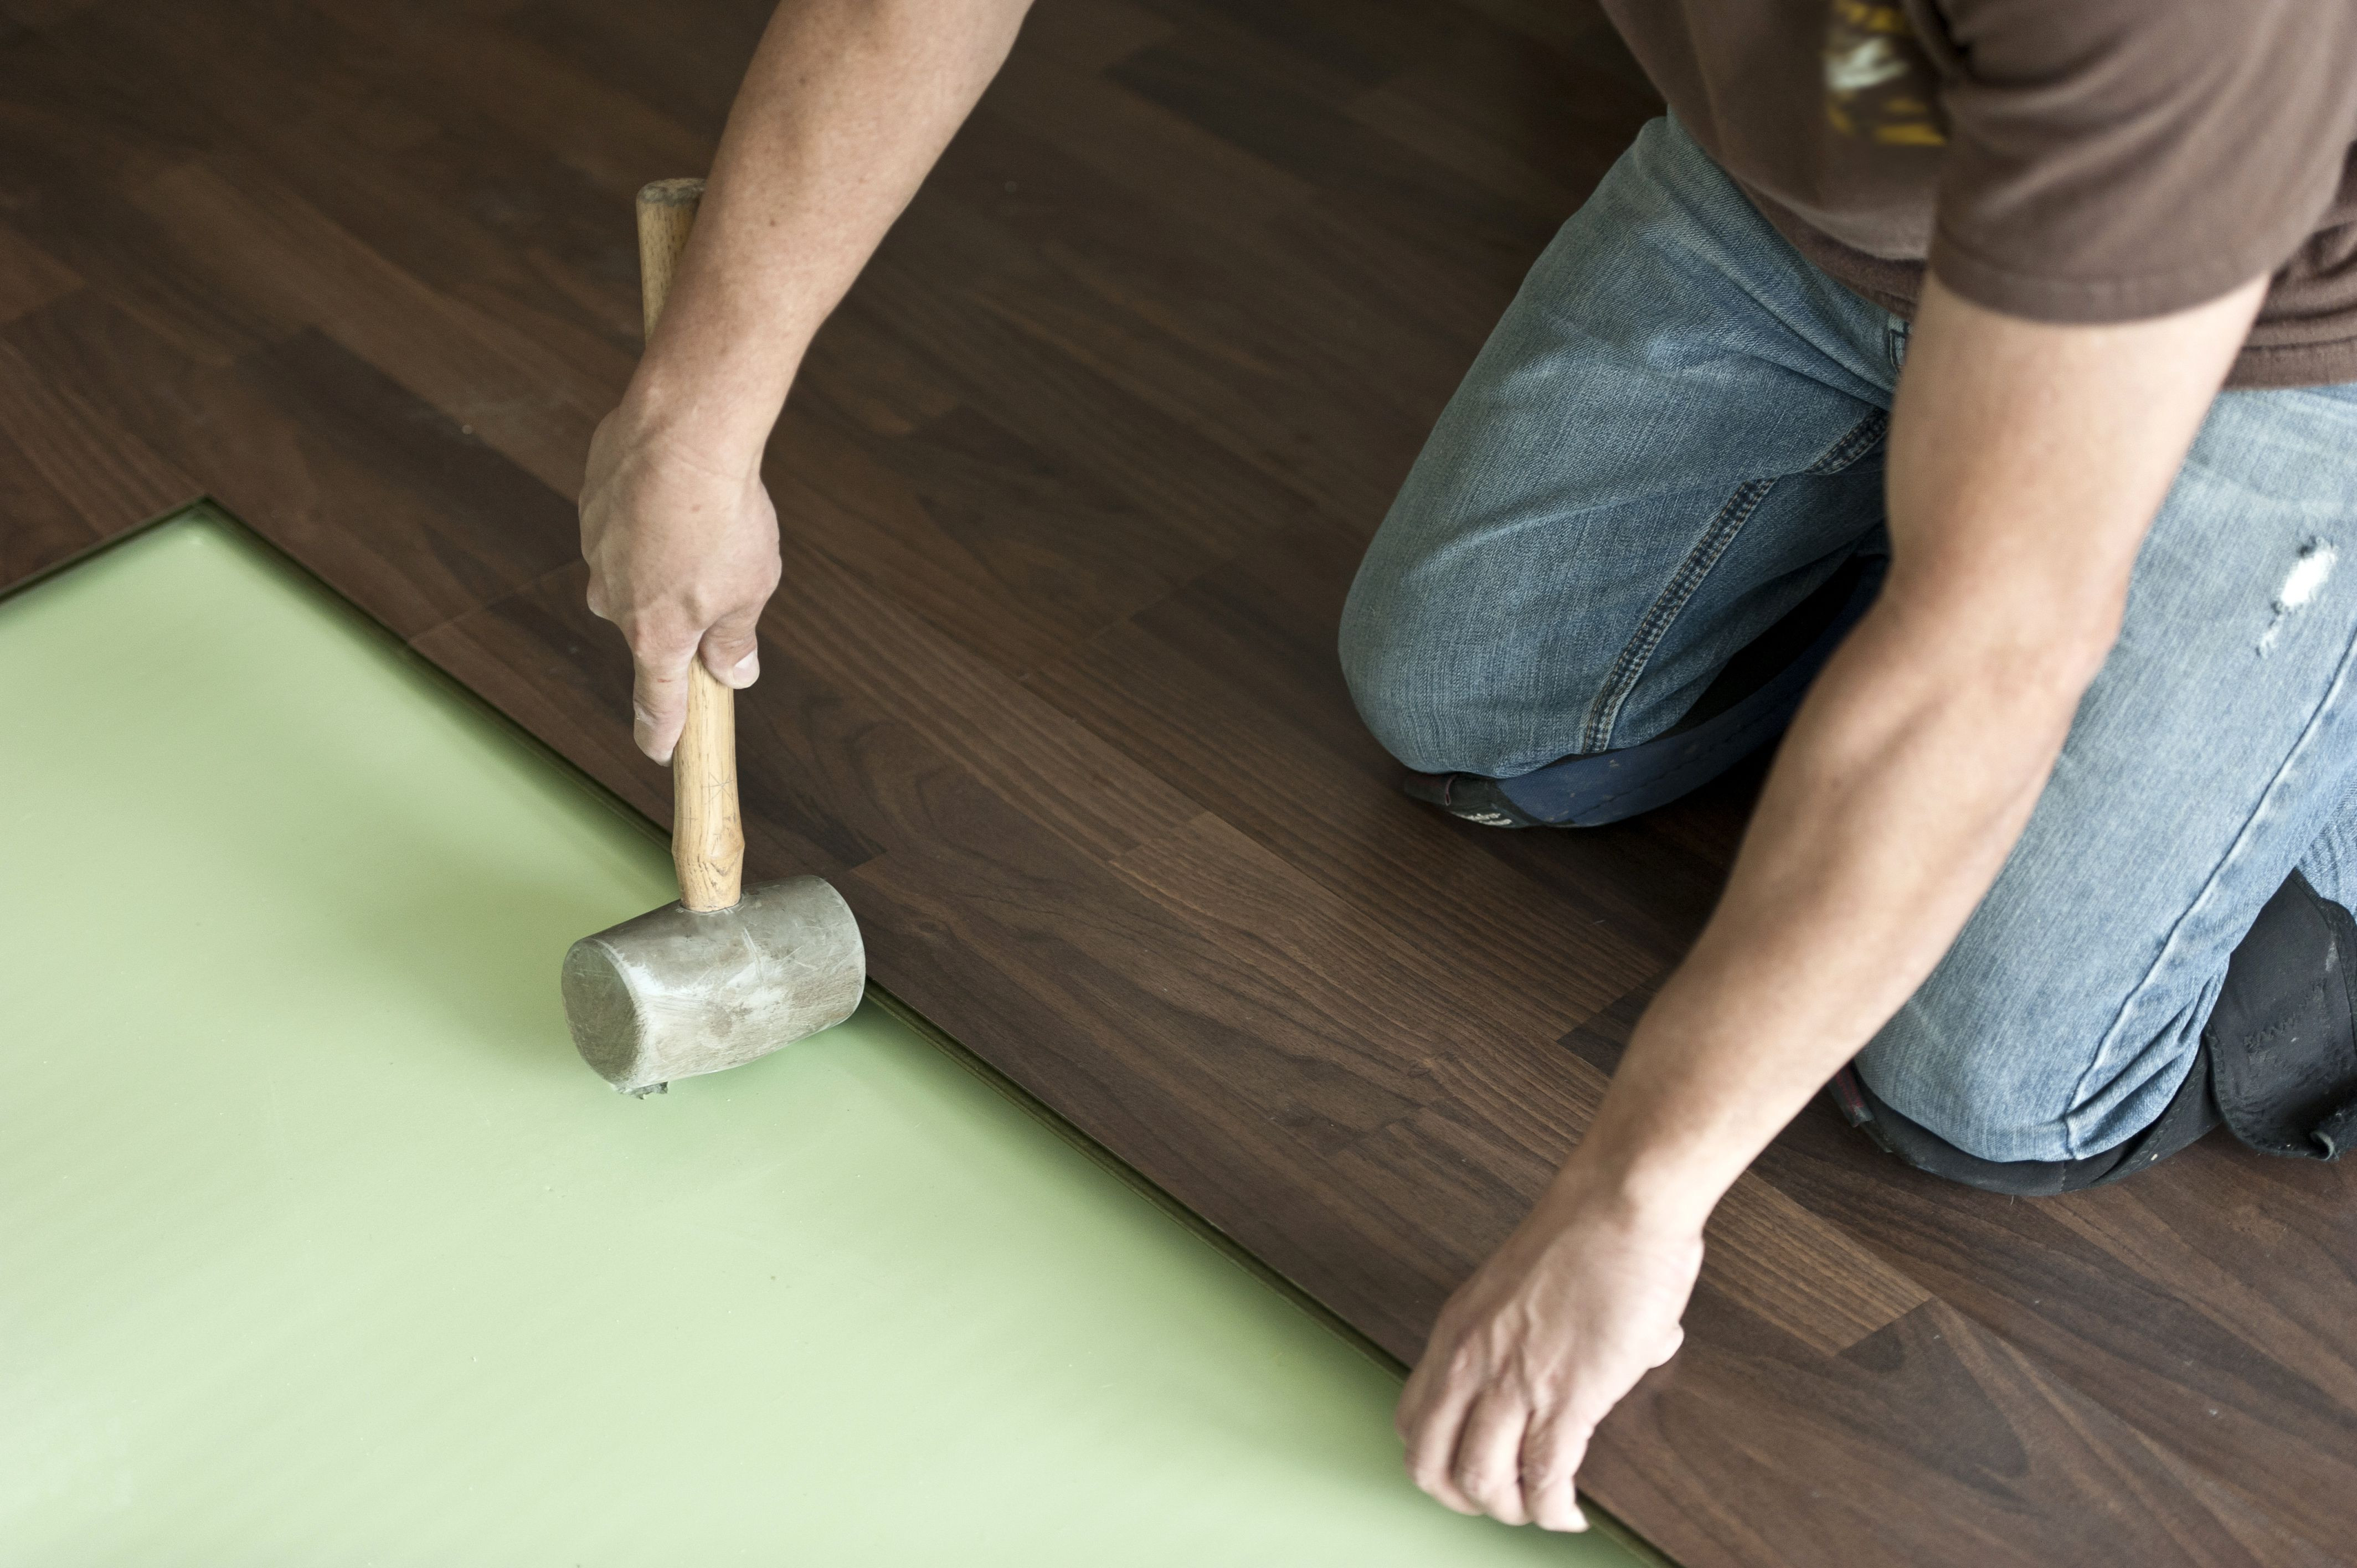 19 Fabulous Cost Of Hardwood Floors Compared to Carpet 2024 free download cost of hardwood floors compared to carpet of can a foam pad be use under solid hardwood flooring intended for installing hardwood floor 155149312 57e967d45f9b586c35ade84a